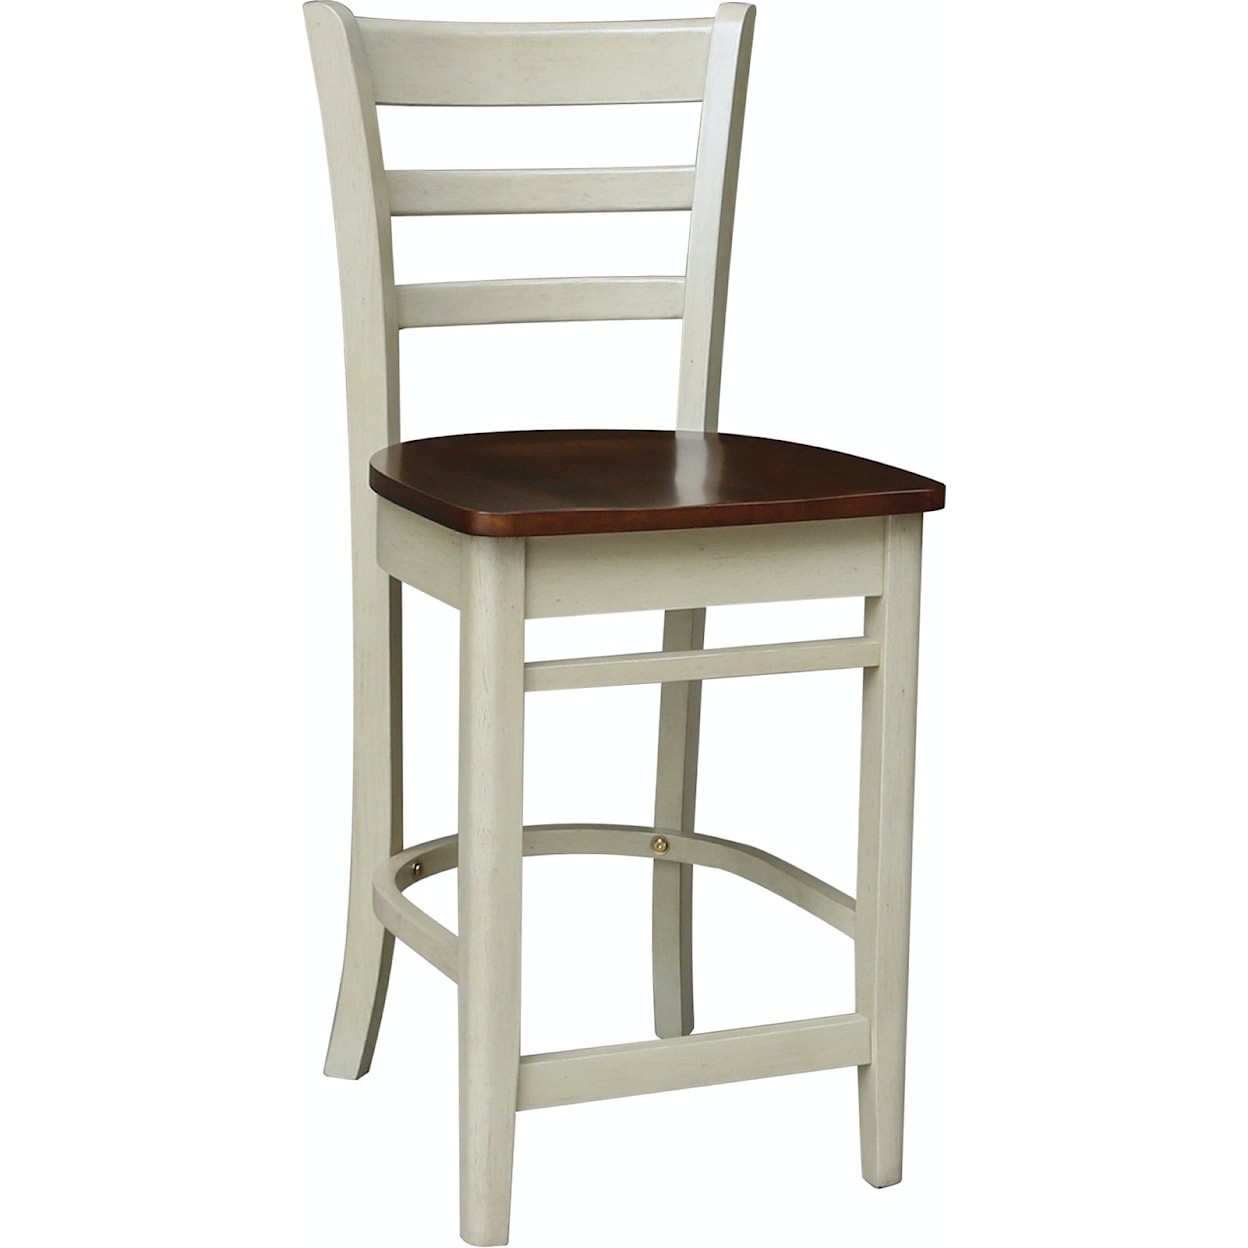 John Thomas Dining Essentials Emily Counter Stool in Expresso / Almond